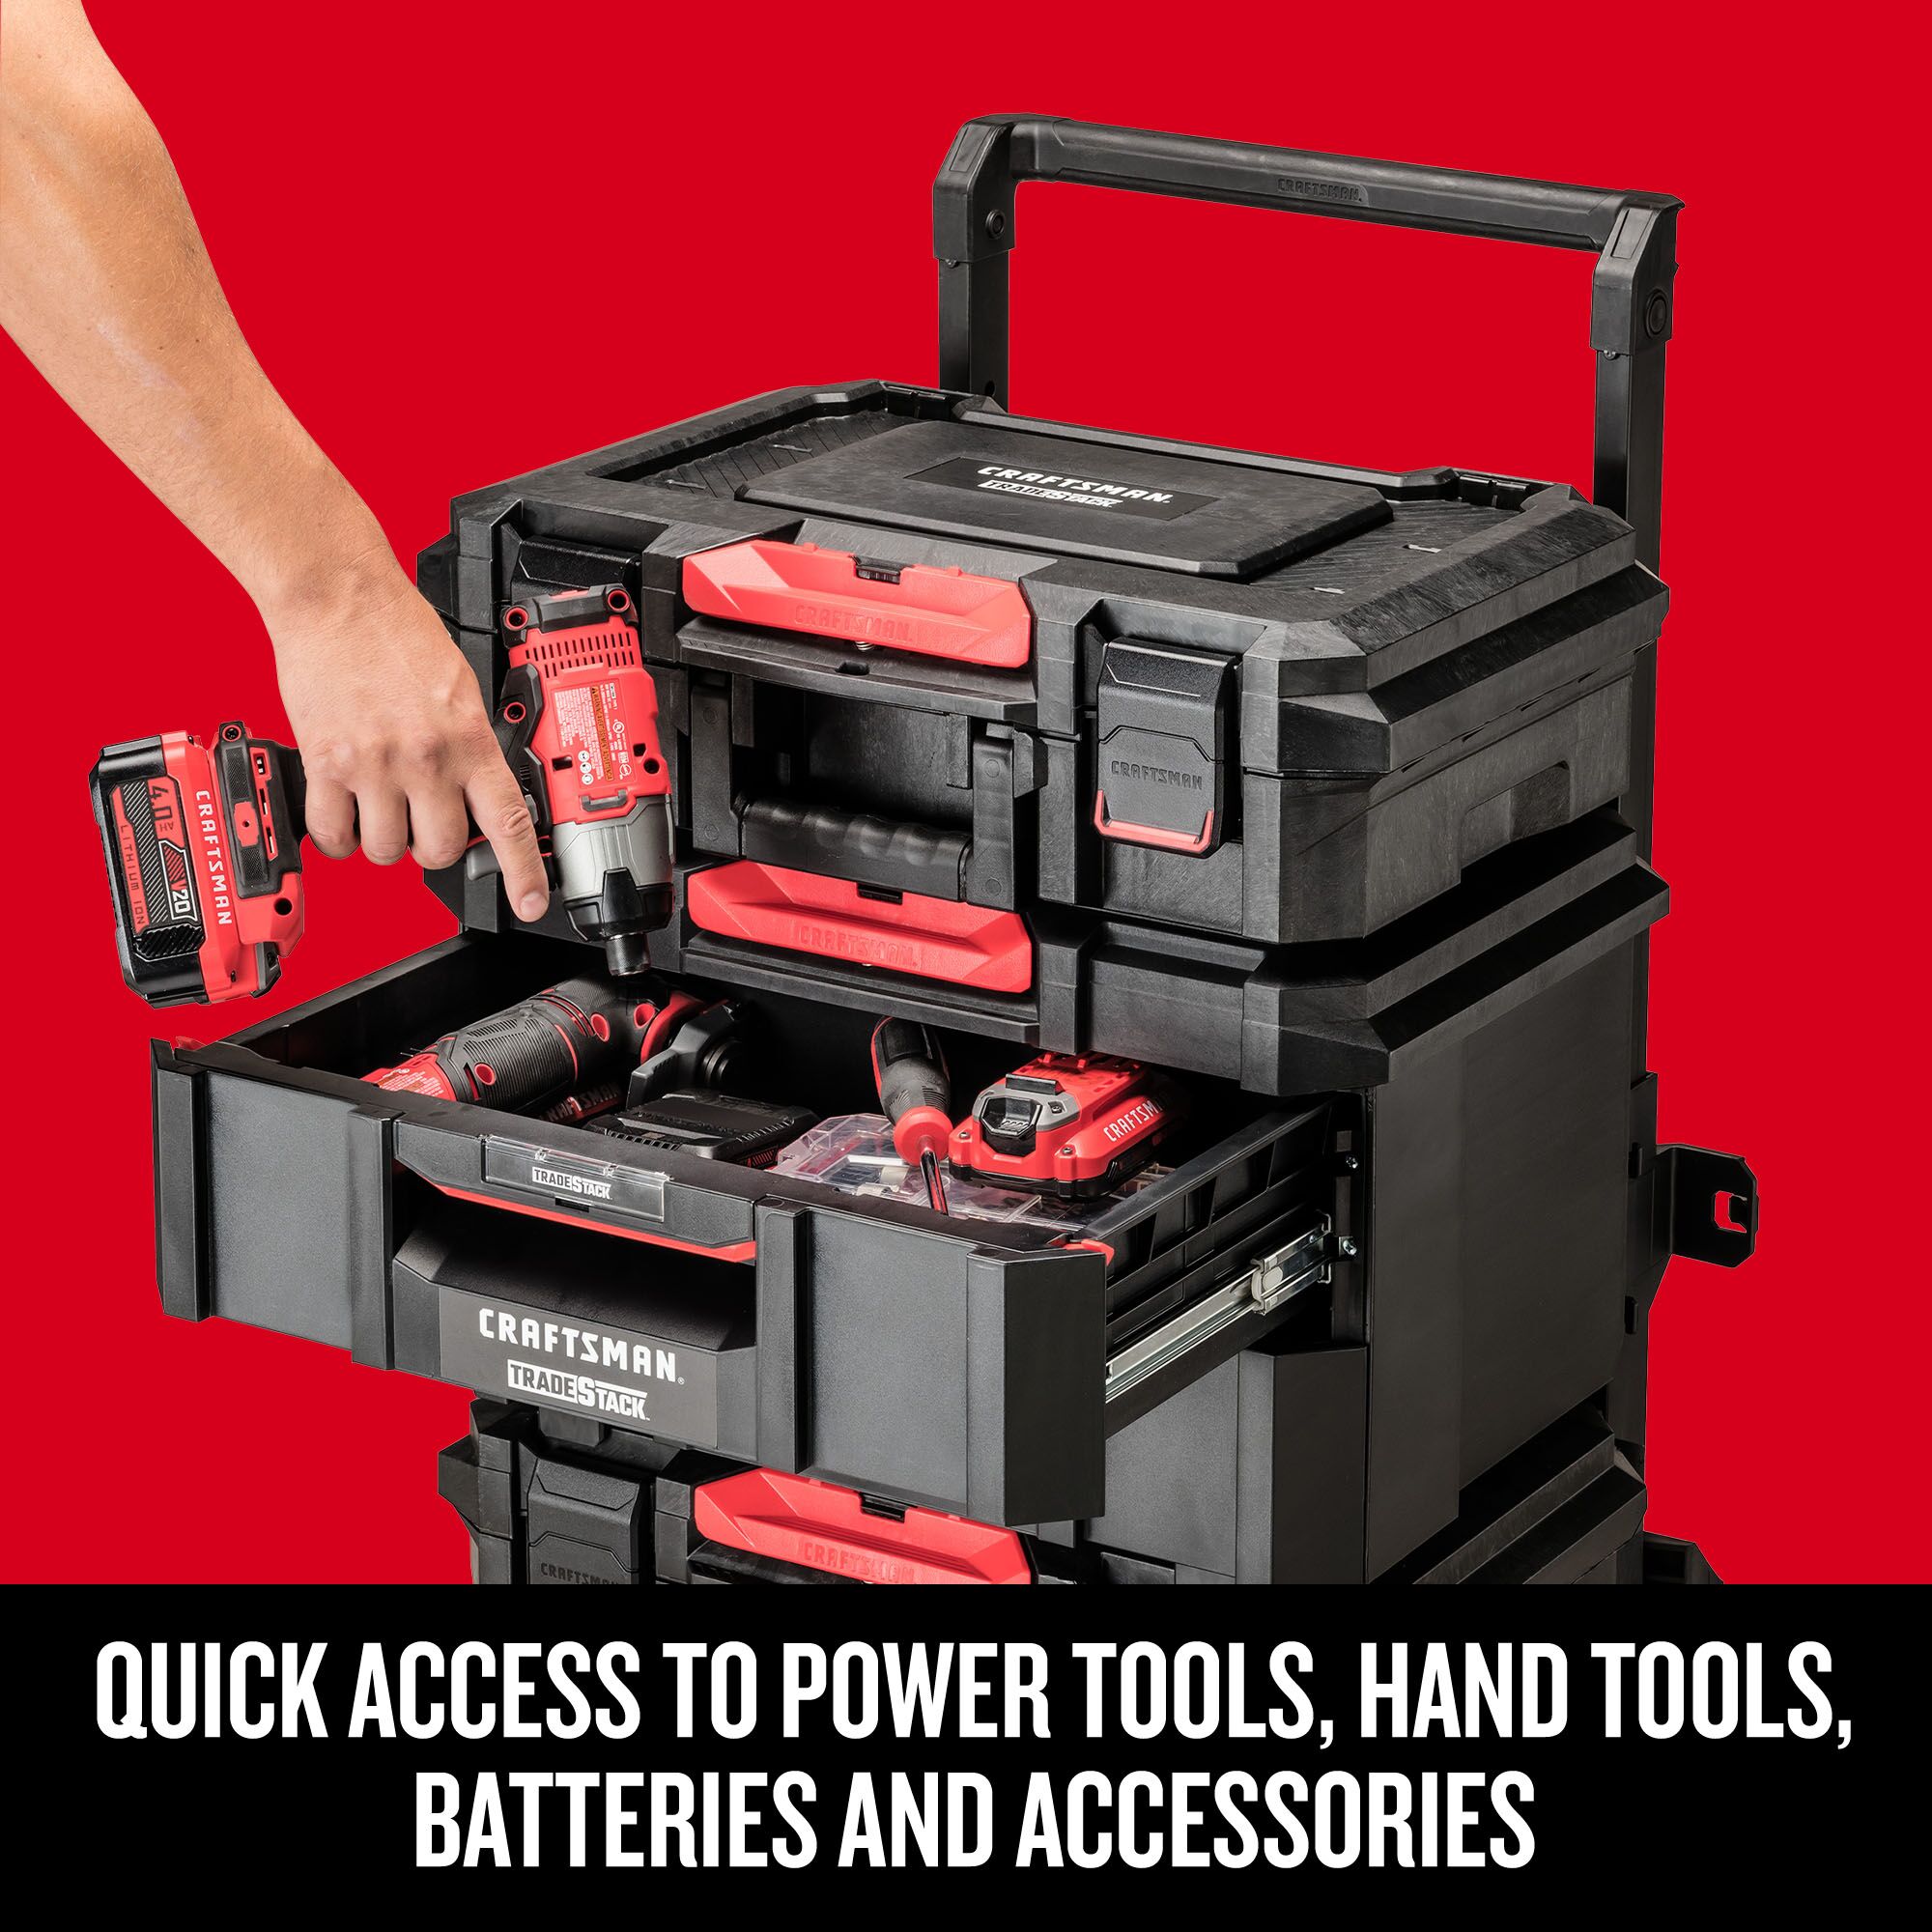 Quick Access to power tools, hand tools, batteries and accessories